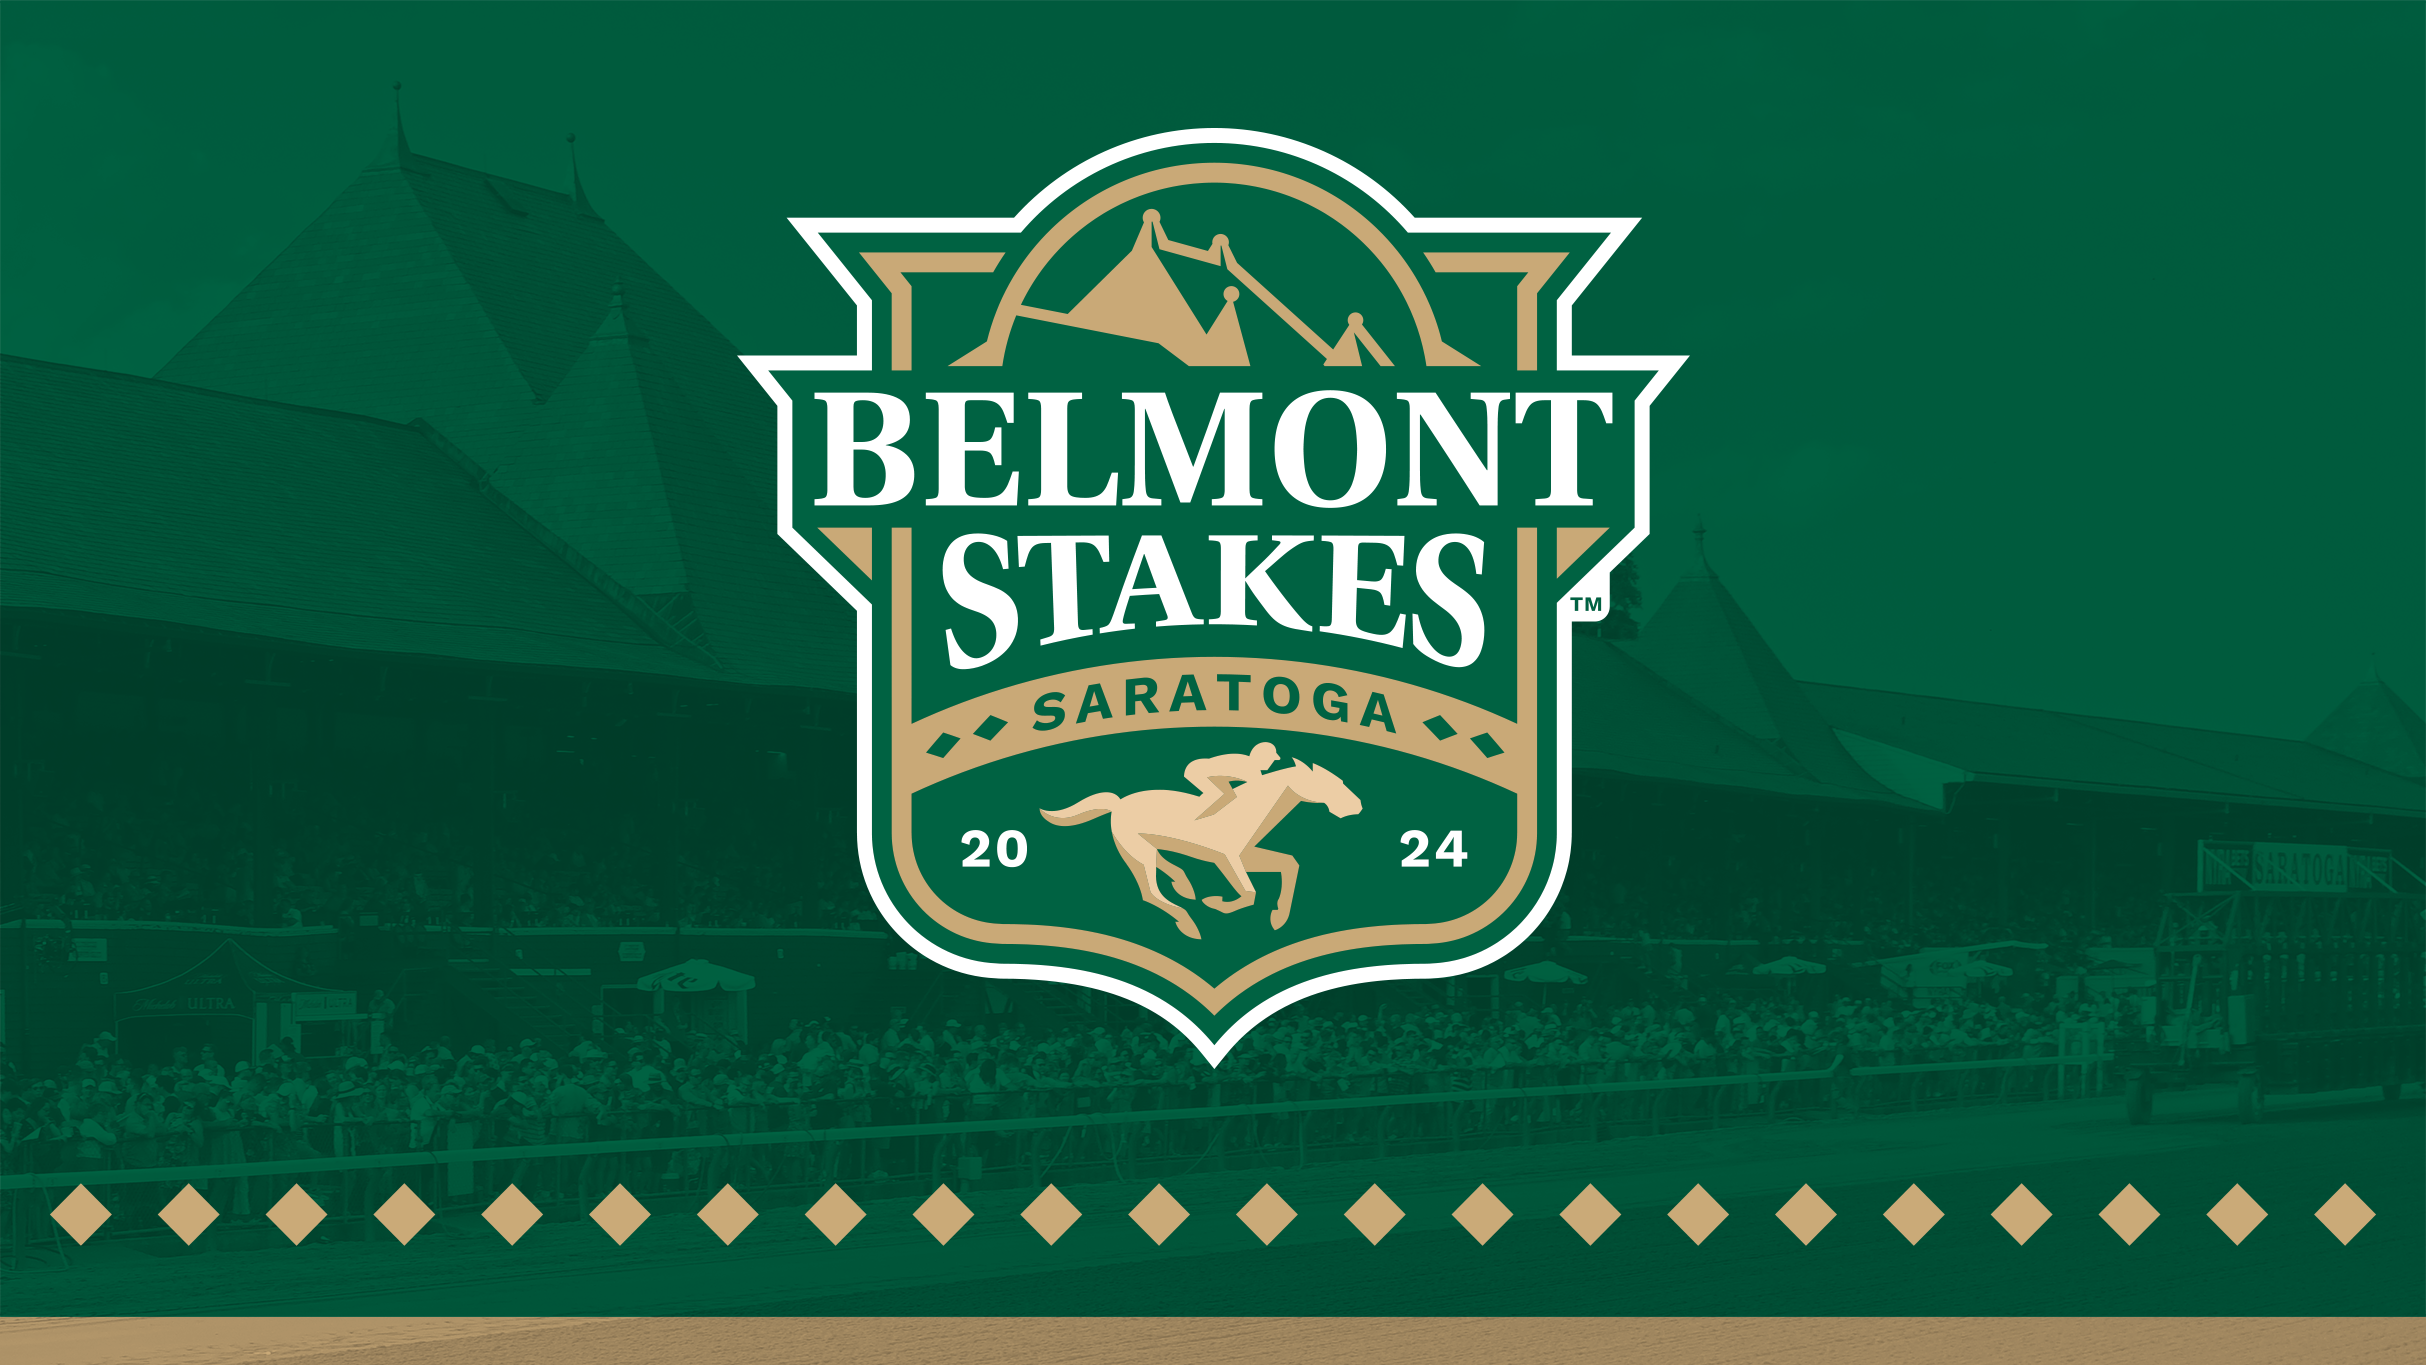 The Belmont Stakes - Easy Goer Dining